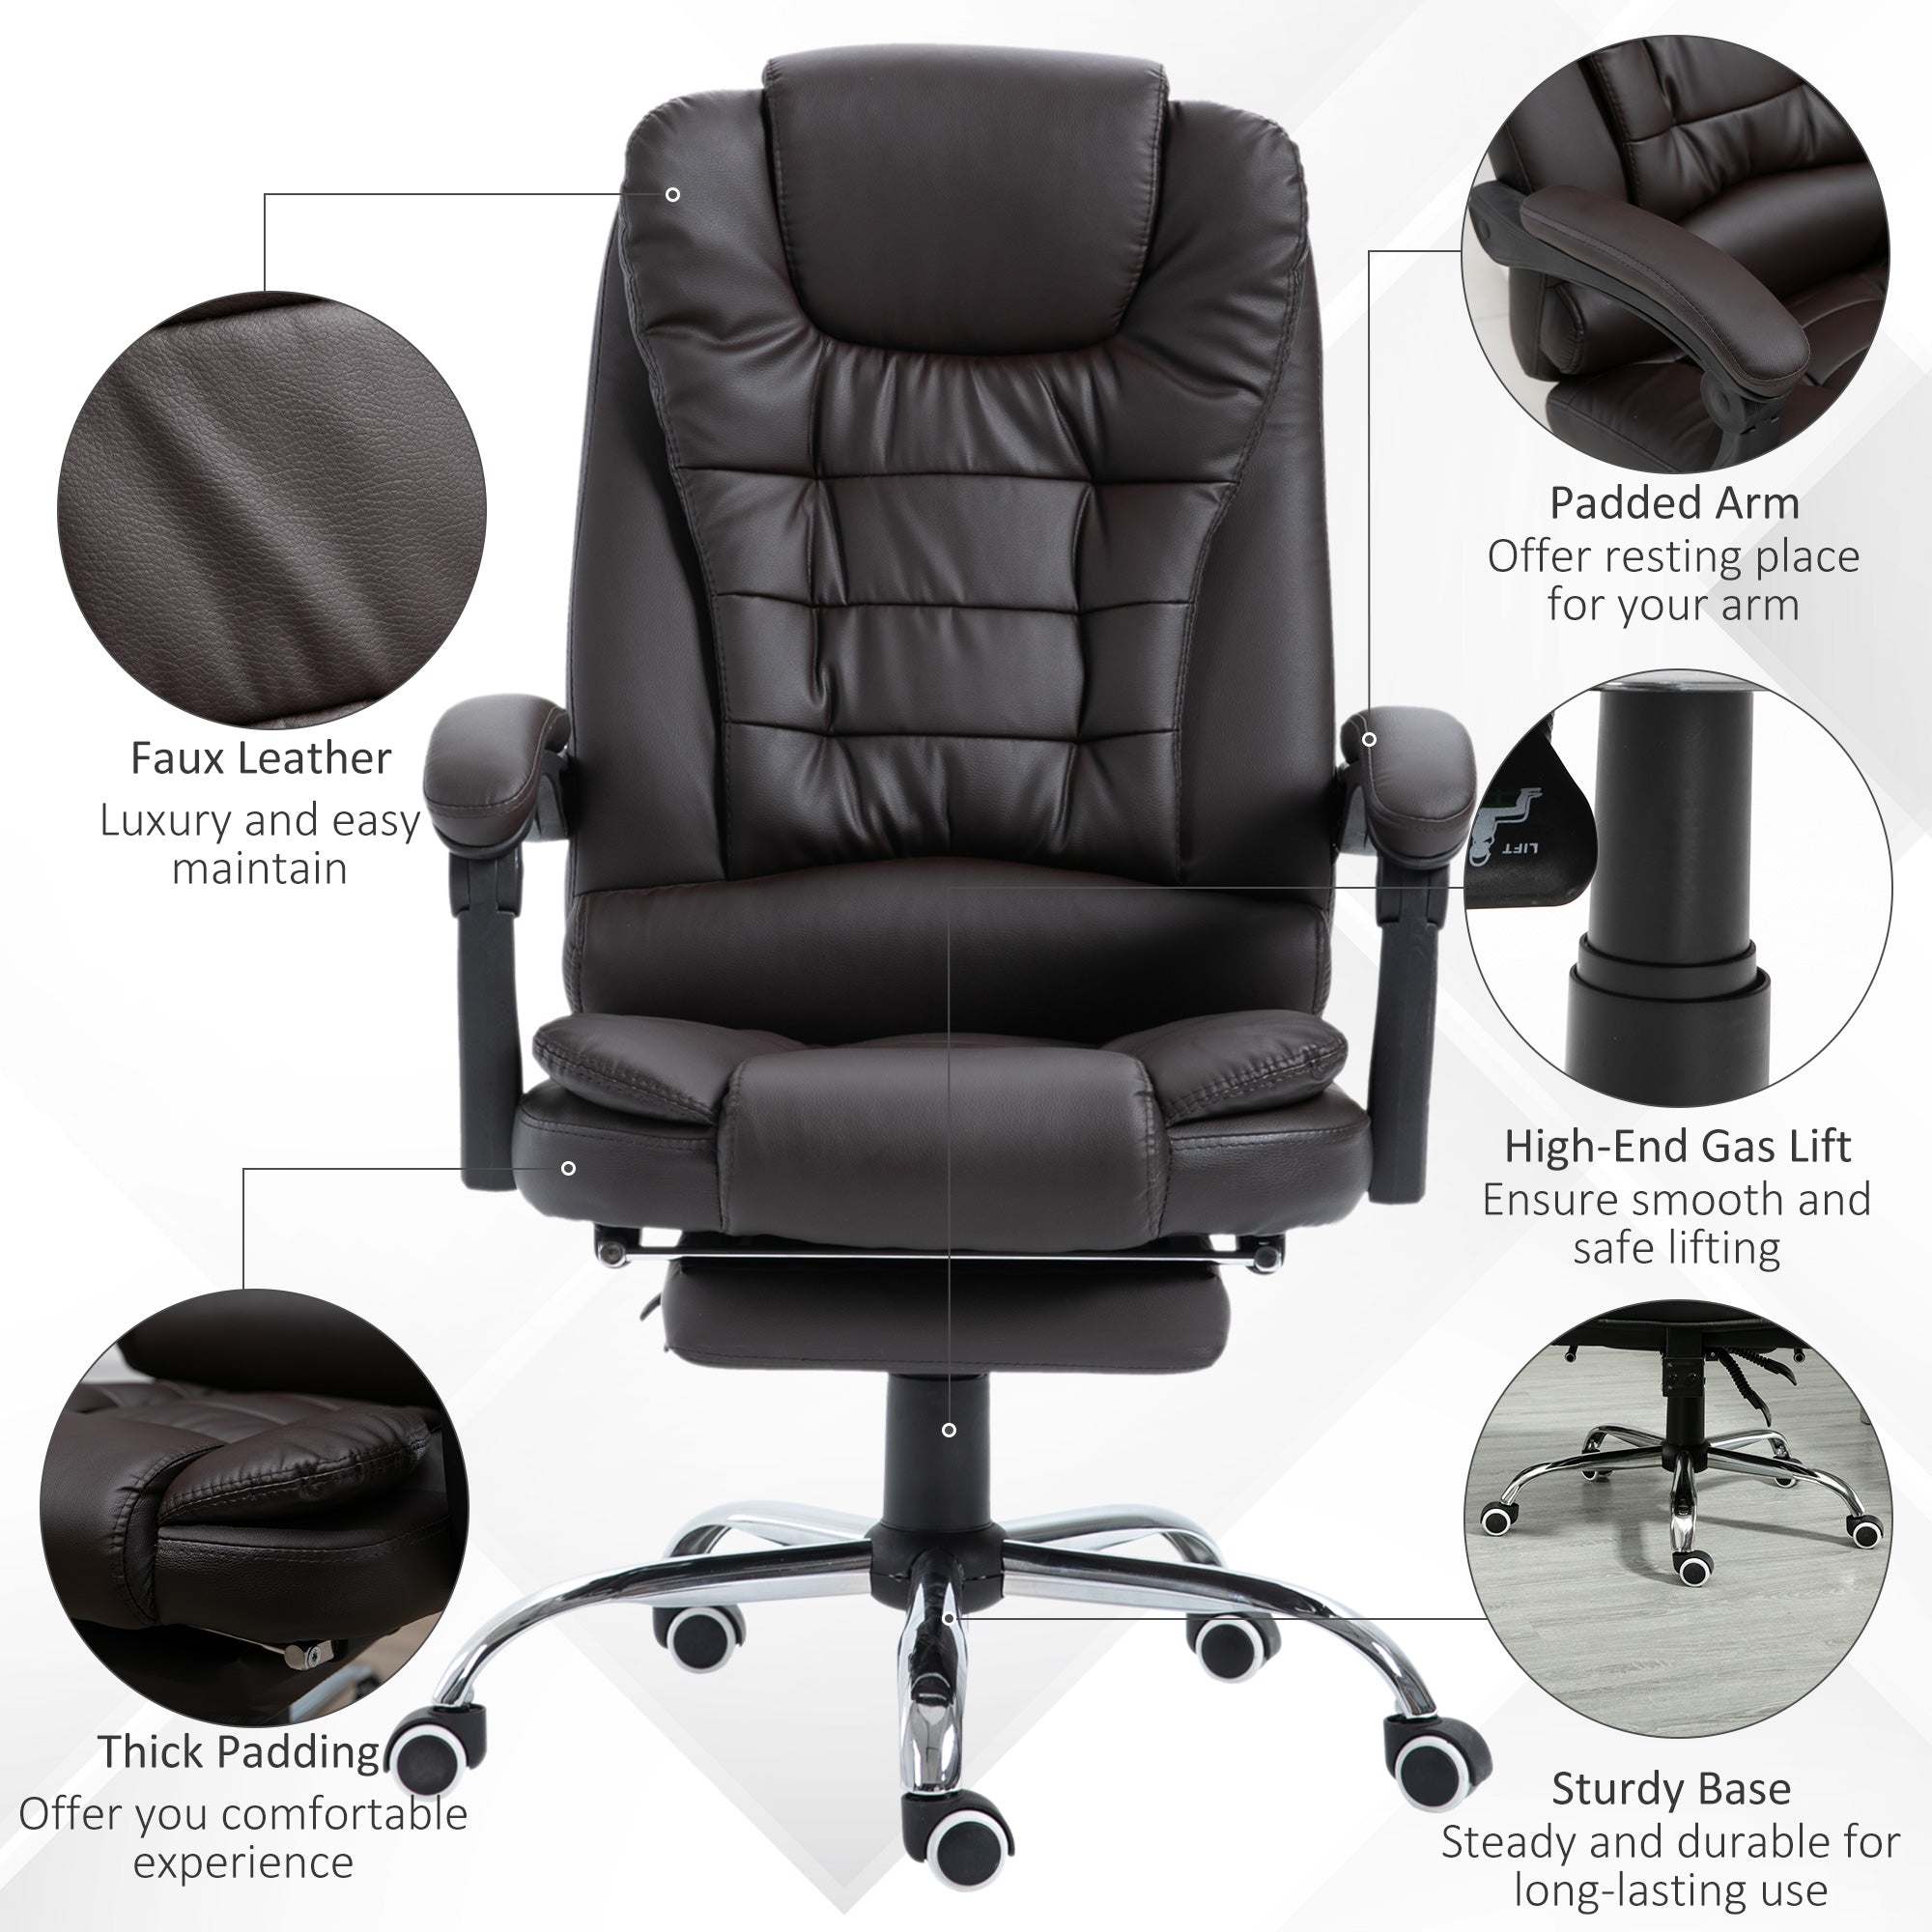 PU Leather Executive Office Chair, High Back Swivel Chair with Retractable Footrest, Adjustable Height, Reclining Function, Brown-3